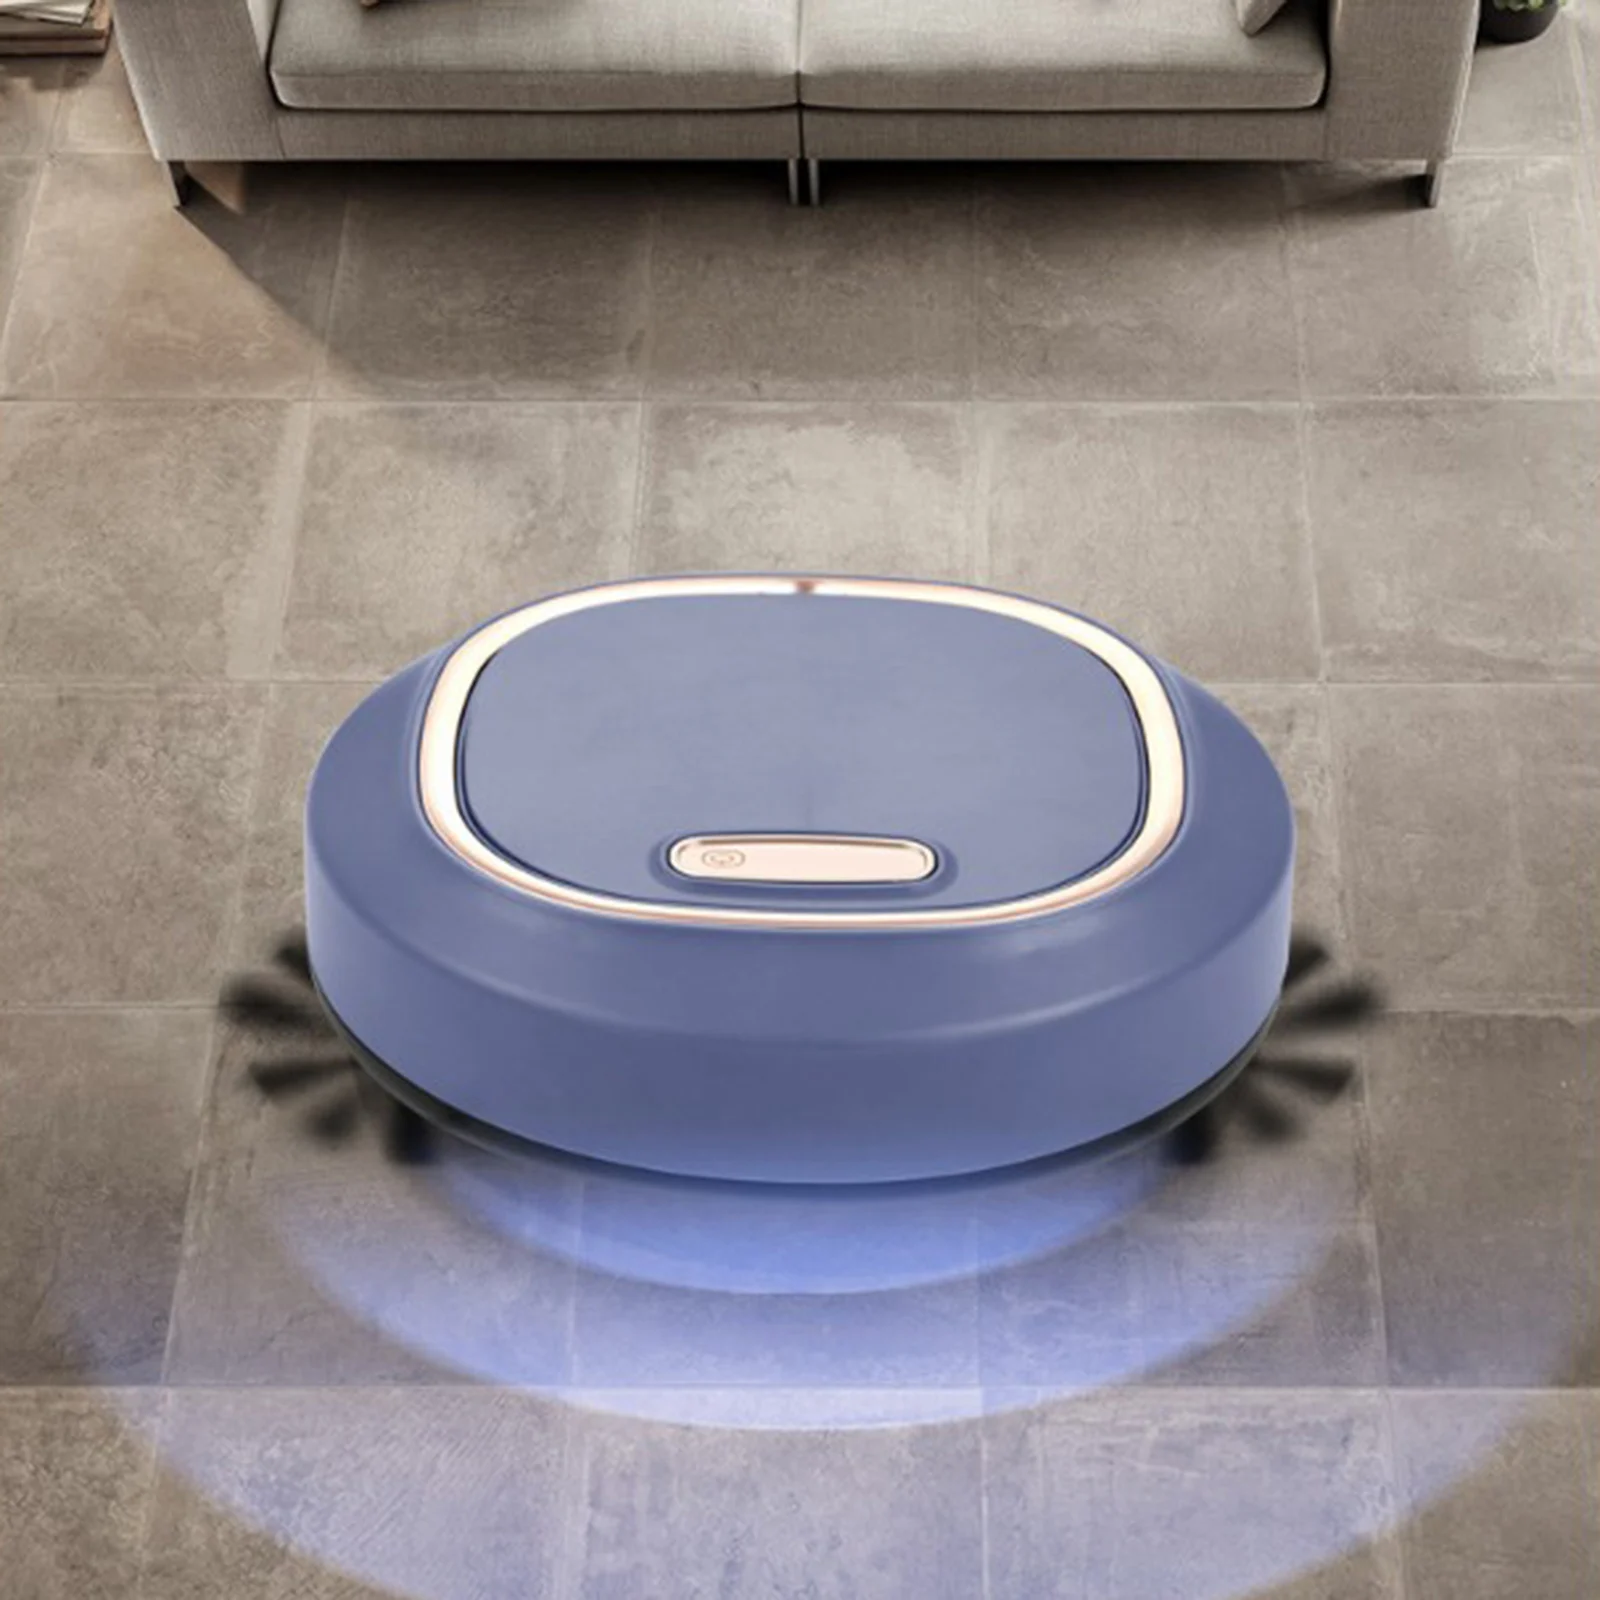 3 IN 1 Smart Robot Vacuum Cleaner Auto Cleaning Mopping Carpet Floor Sweeper